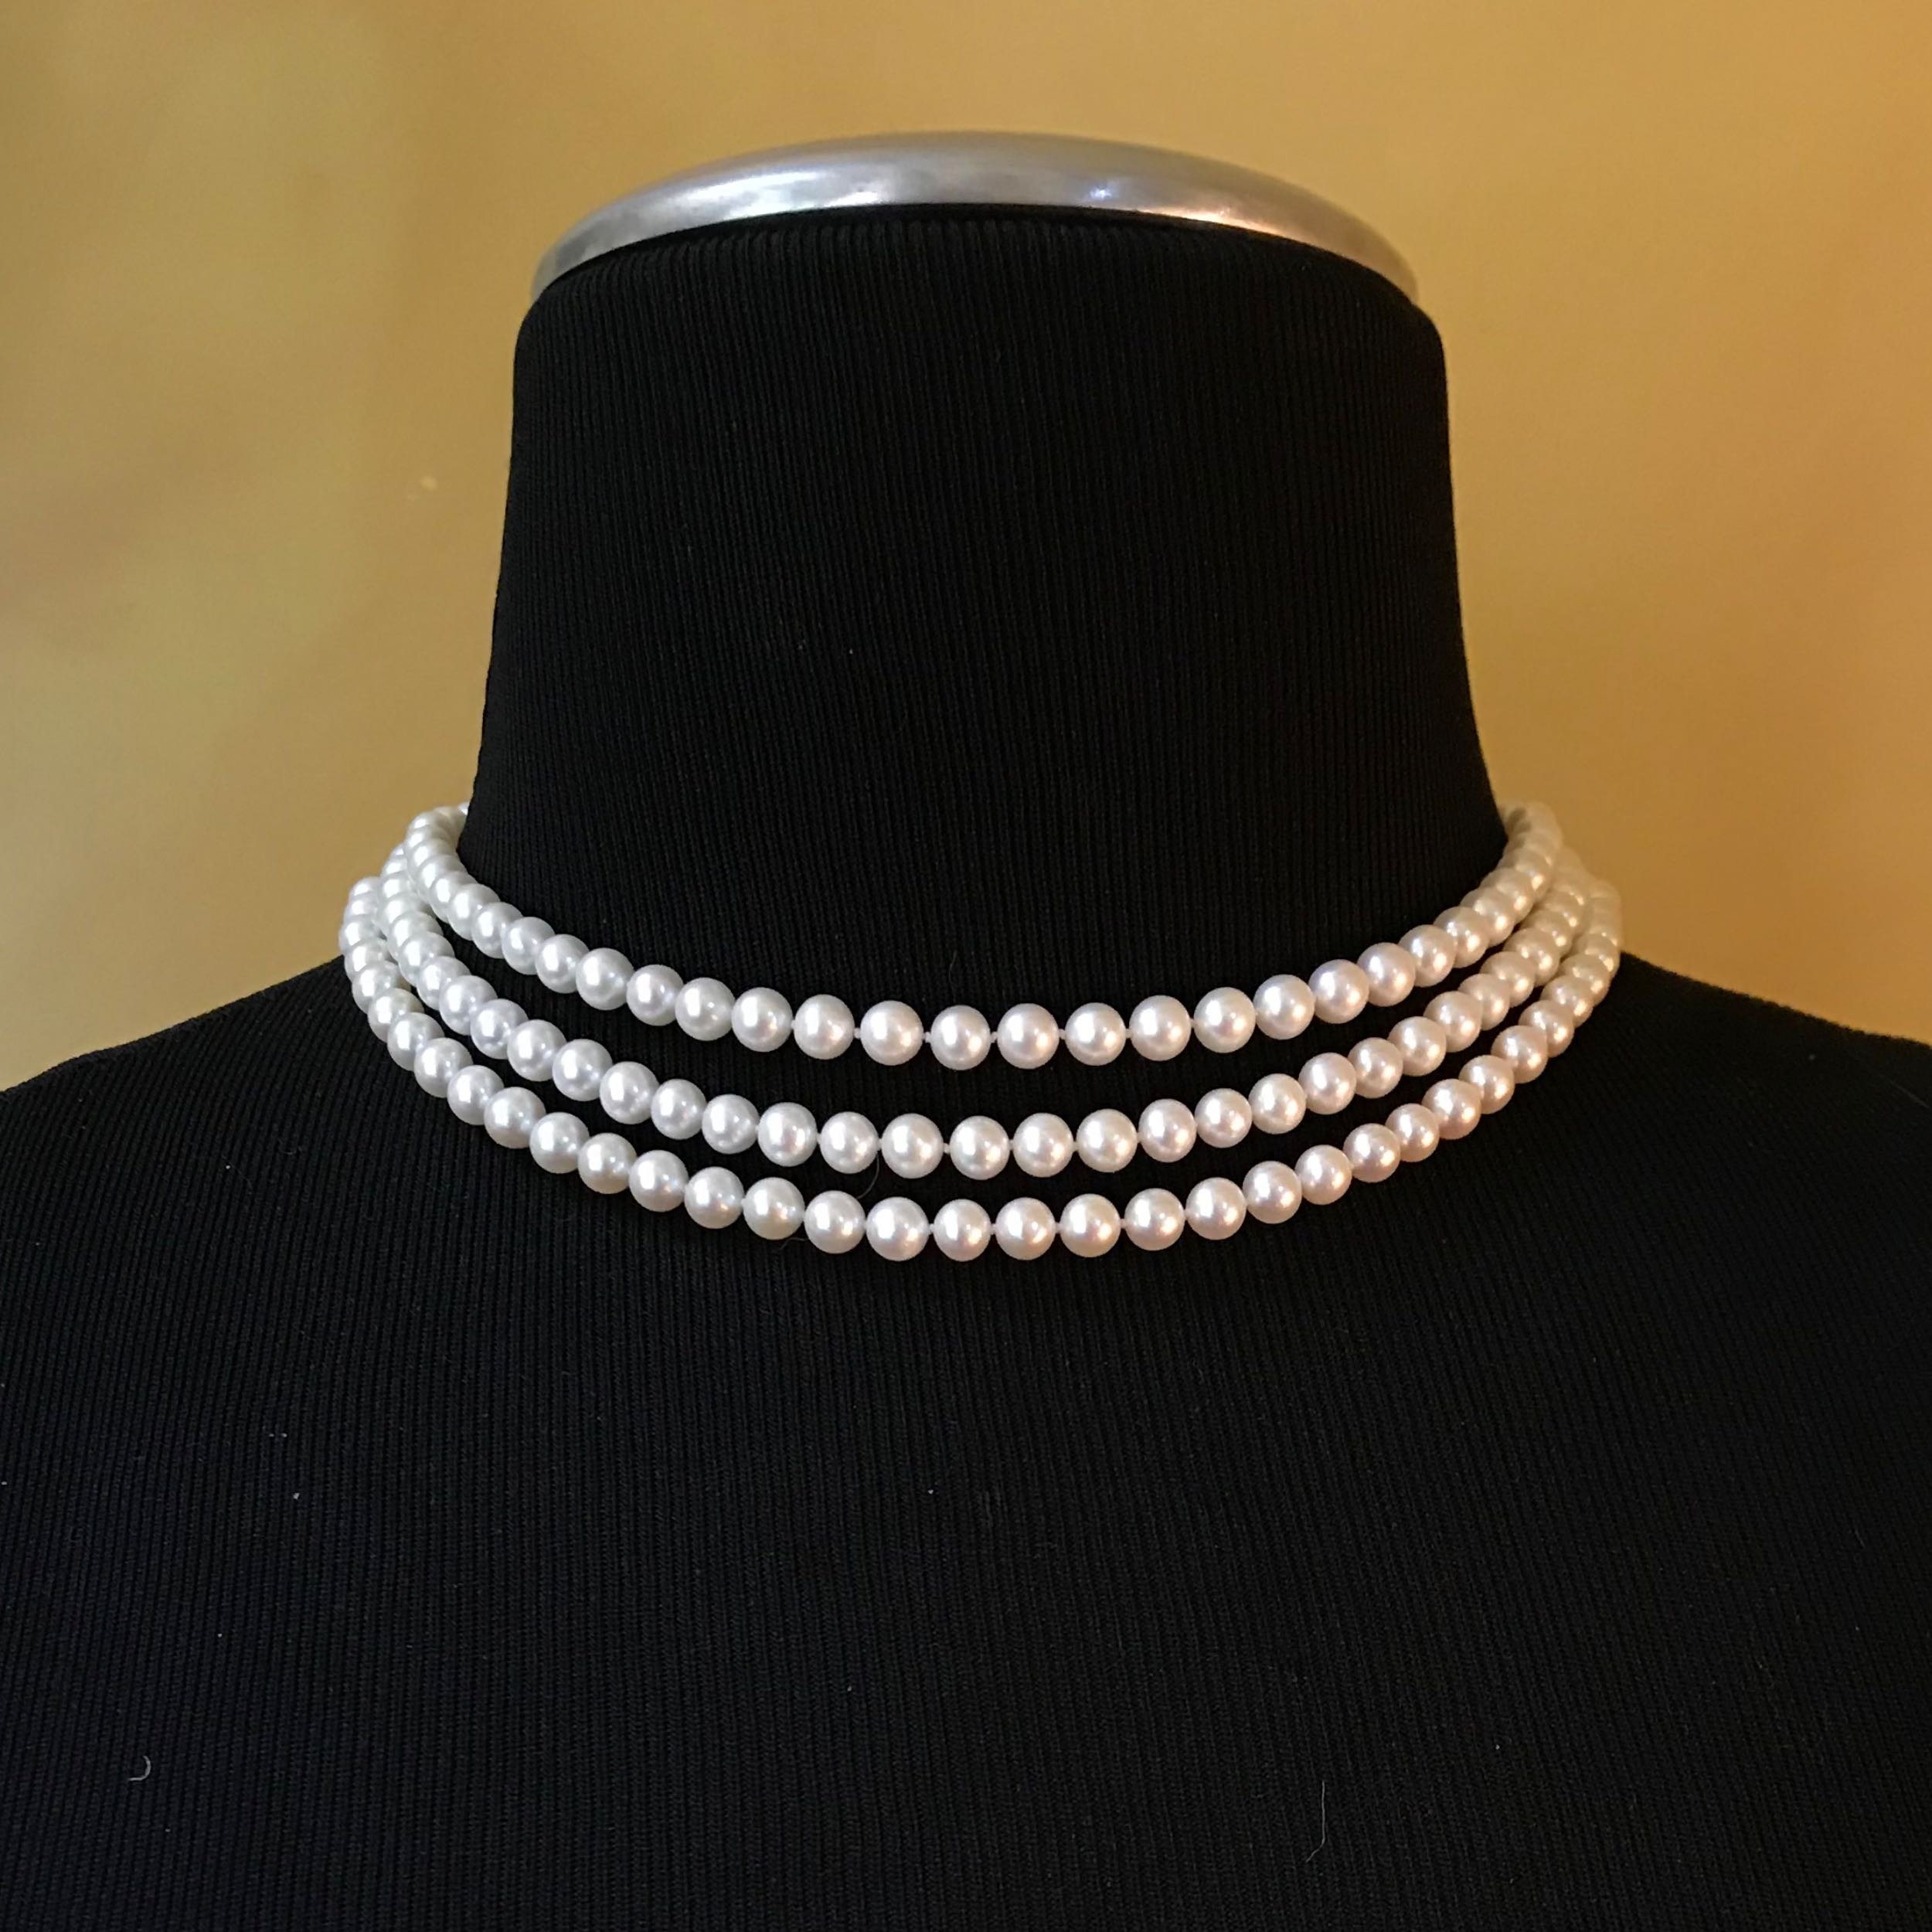 Buy quality Freshwater White Round Pearls Necklace 3 Layers JPM0106 in  Hyderabad